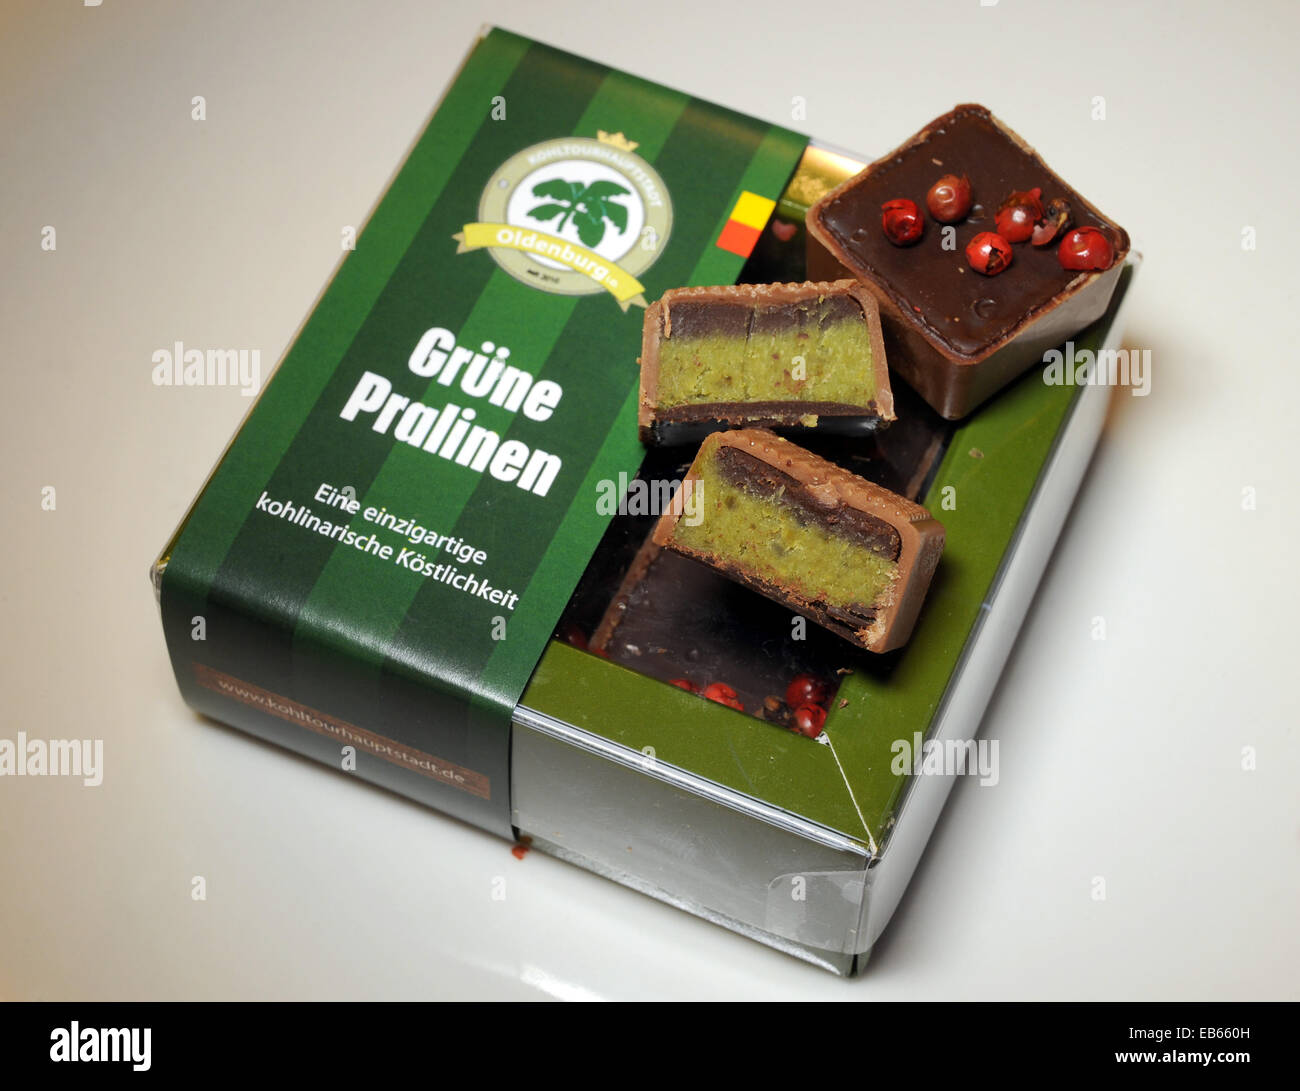 Oldenburg, Germany. 19th Nov, 2014. Chocolates filled with green cabbage on a box that reads 'Green Chocolates' at Cafe Klinge in Oldenburg, Germany, 19 November 2014. Photo: INGO WAGNER/dpa/Alamy Live News Stock Photo